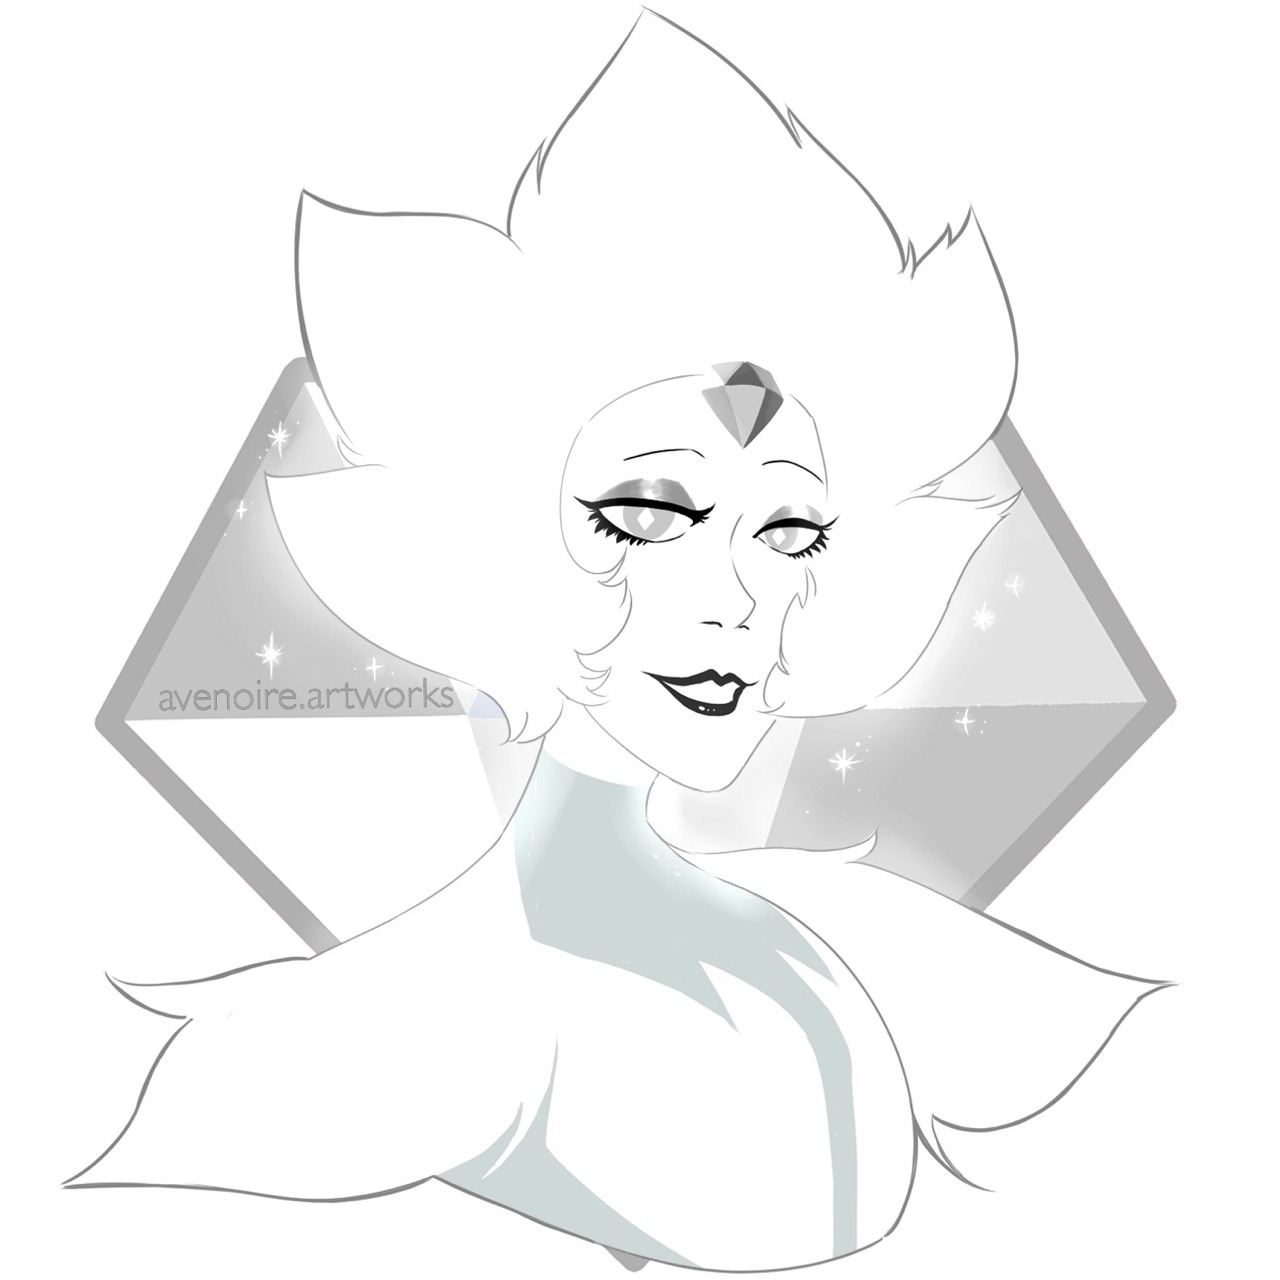 The Diamond Authority it occurred to me i have never drawn anything from SU (despite my on and off love for the show)